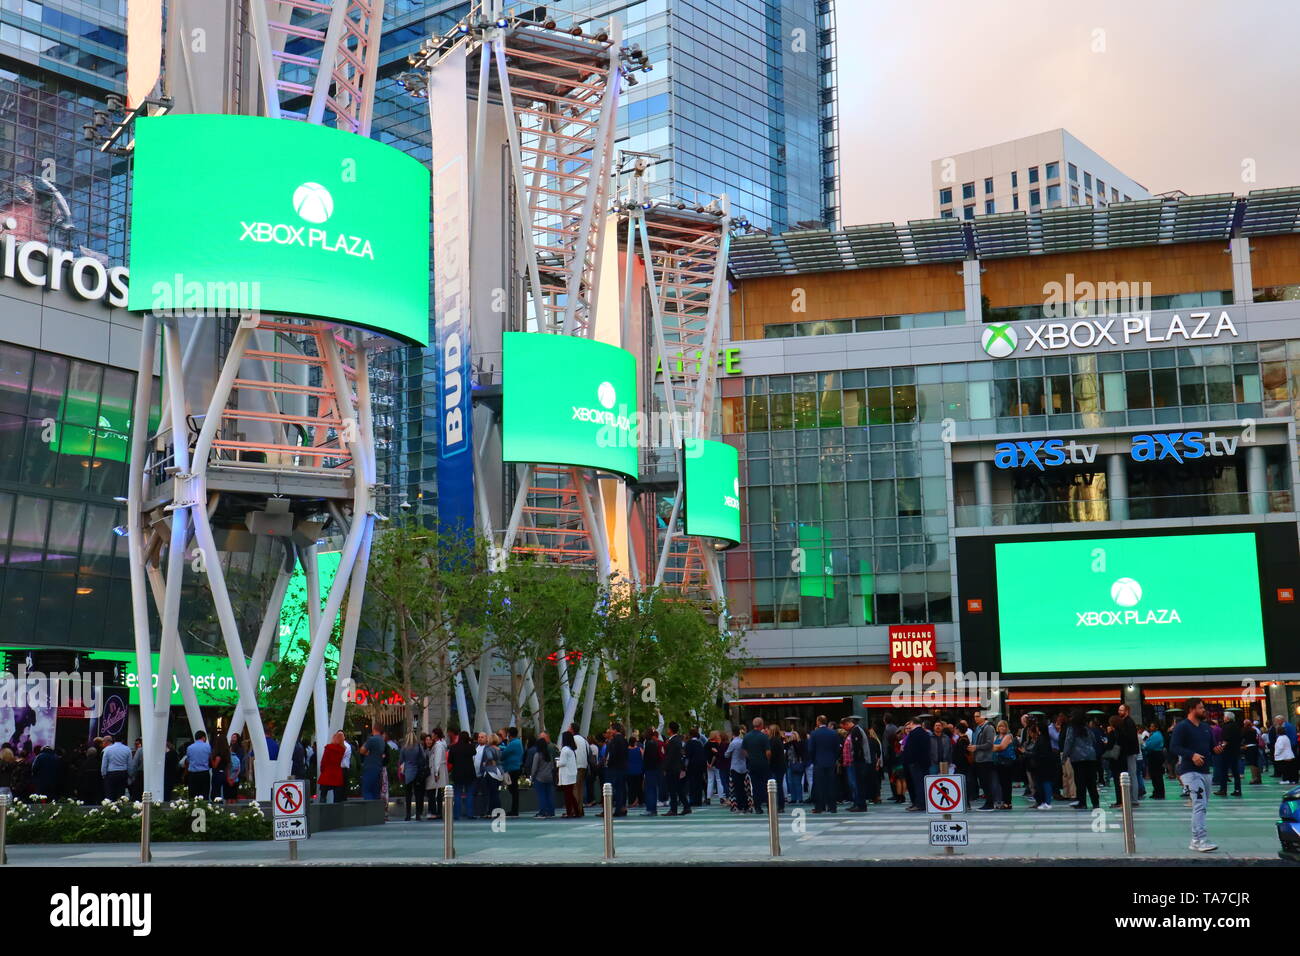 XBOX PLAZA, Microsoft Theater in front of the Staples Center, downtown of Los Angeles - California Stock Photo